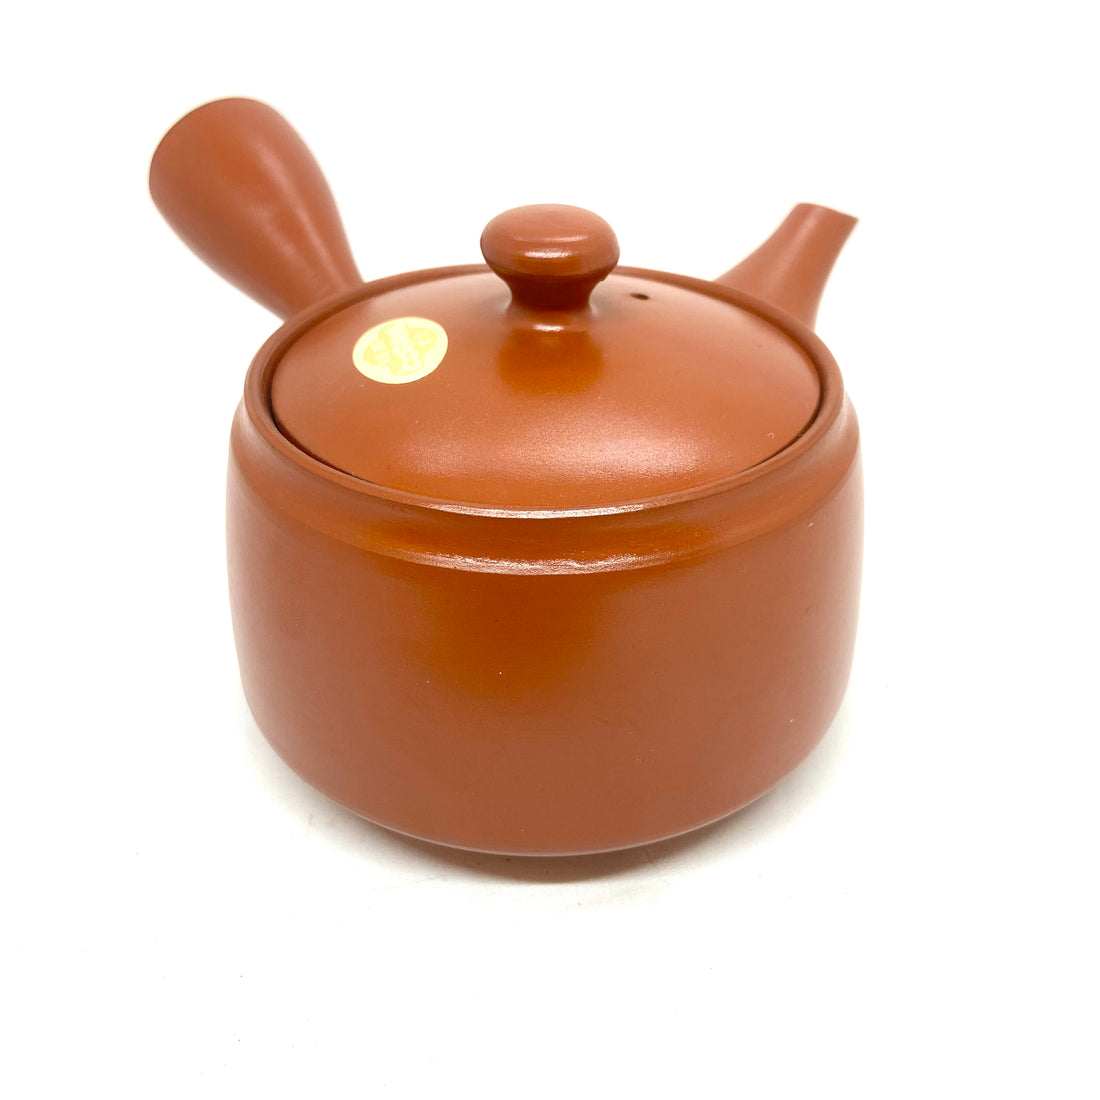 Kyusu Japanese Teapot - Classic Vermillion with Basket infuser - 290ml  - #901